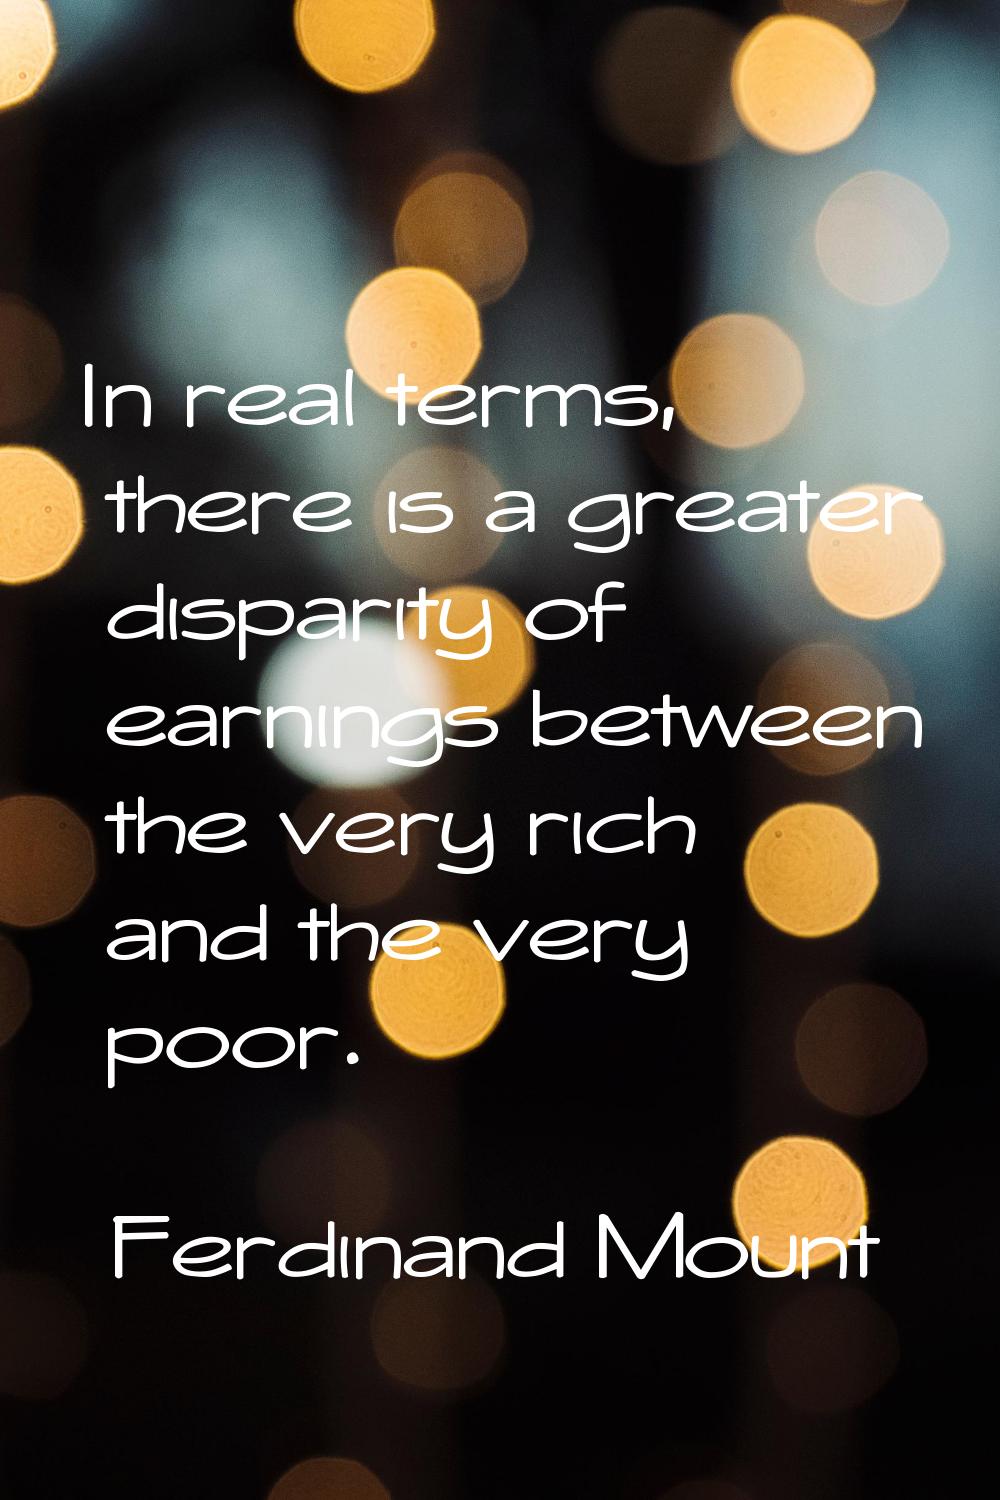 In real terms, there is a greater disparity of earnings between the very rich and the very poor.